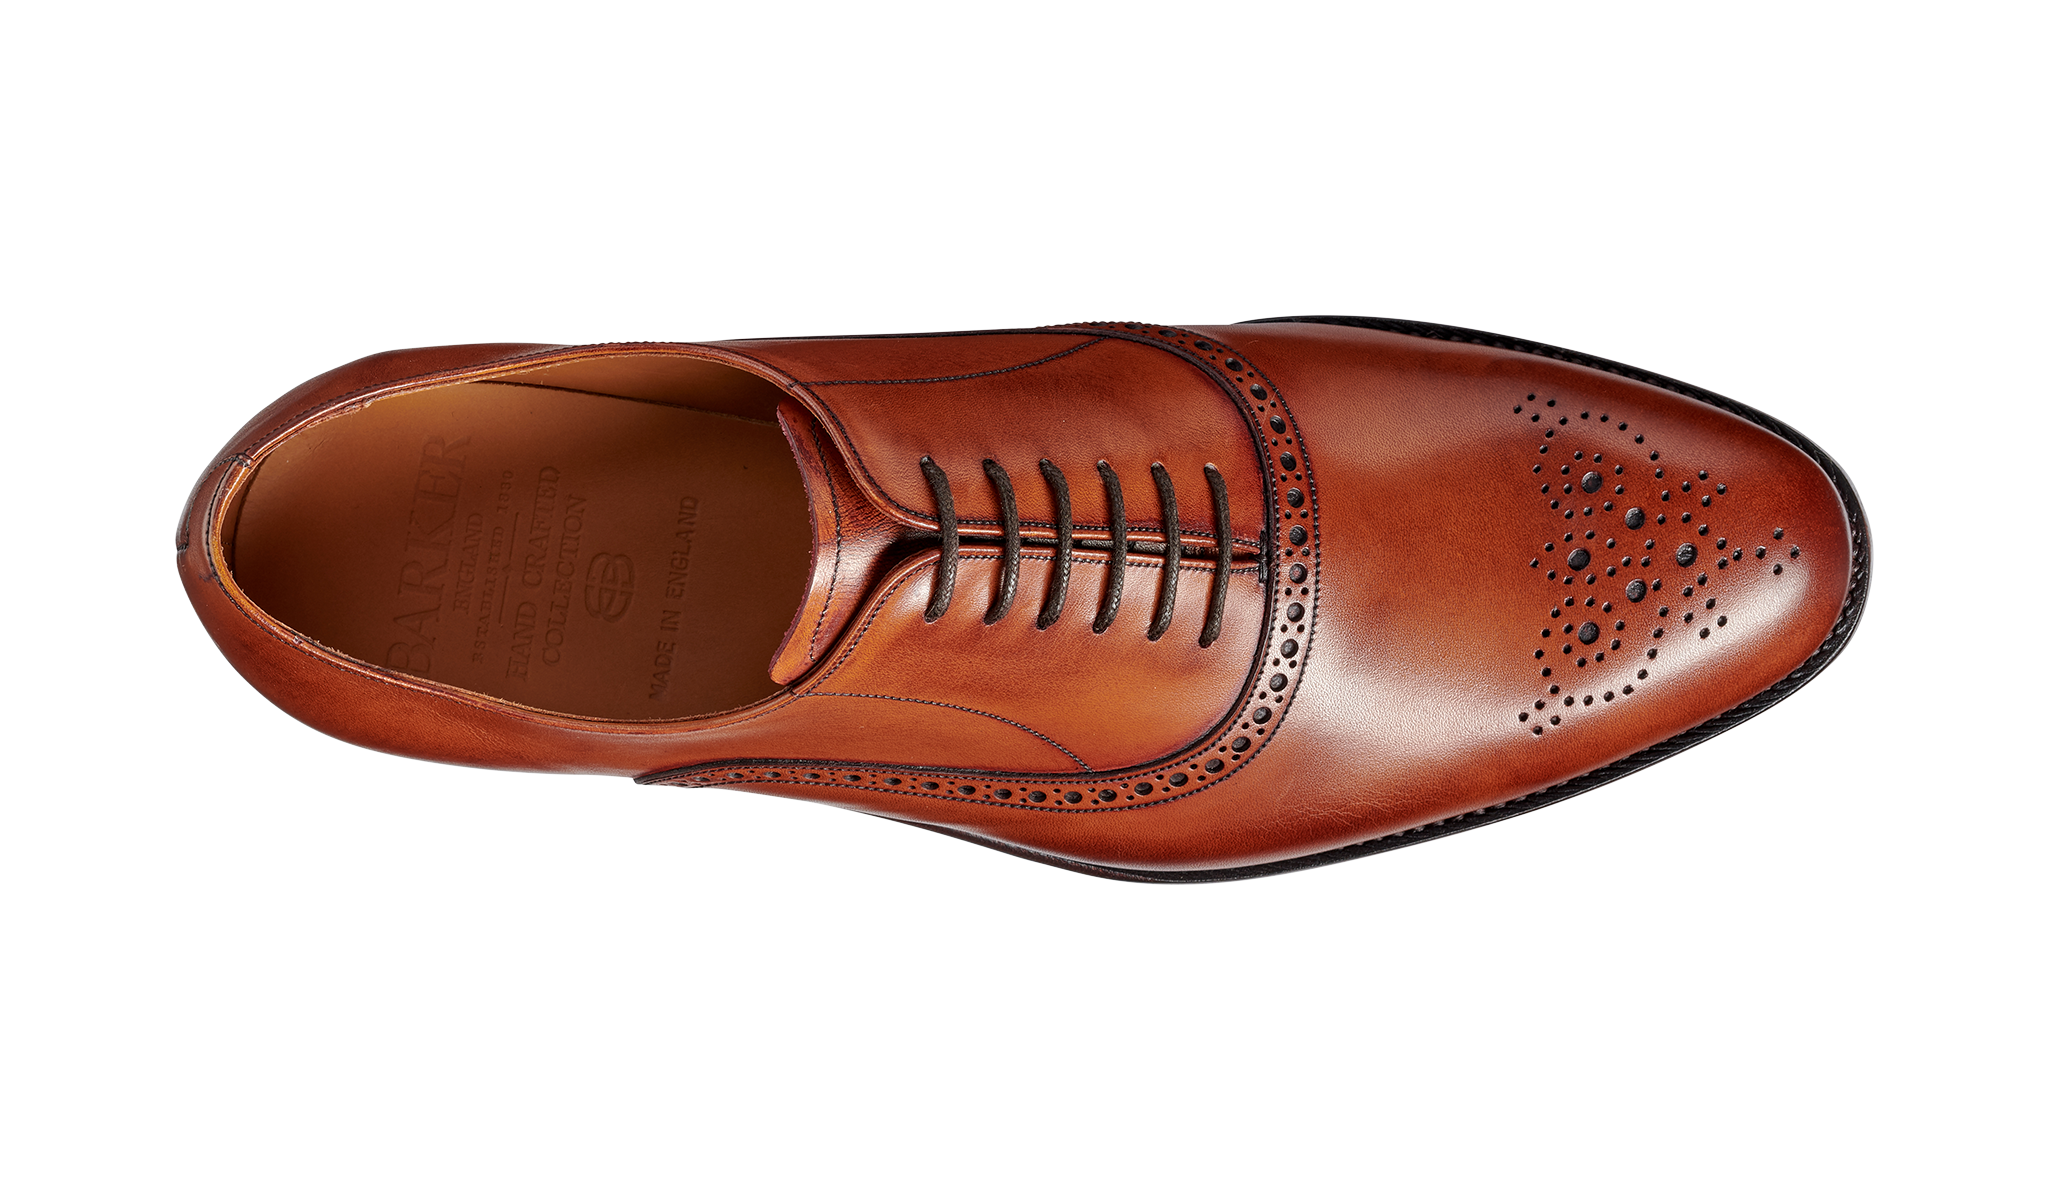 Newchurch - Antique Rosewood | Mens Oxford Brogue | Barker Shoes UK